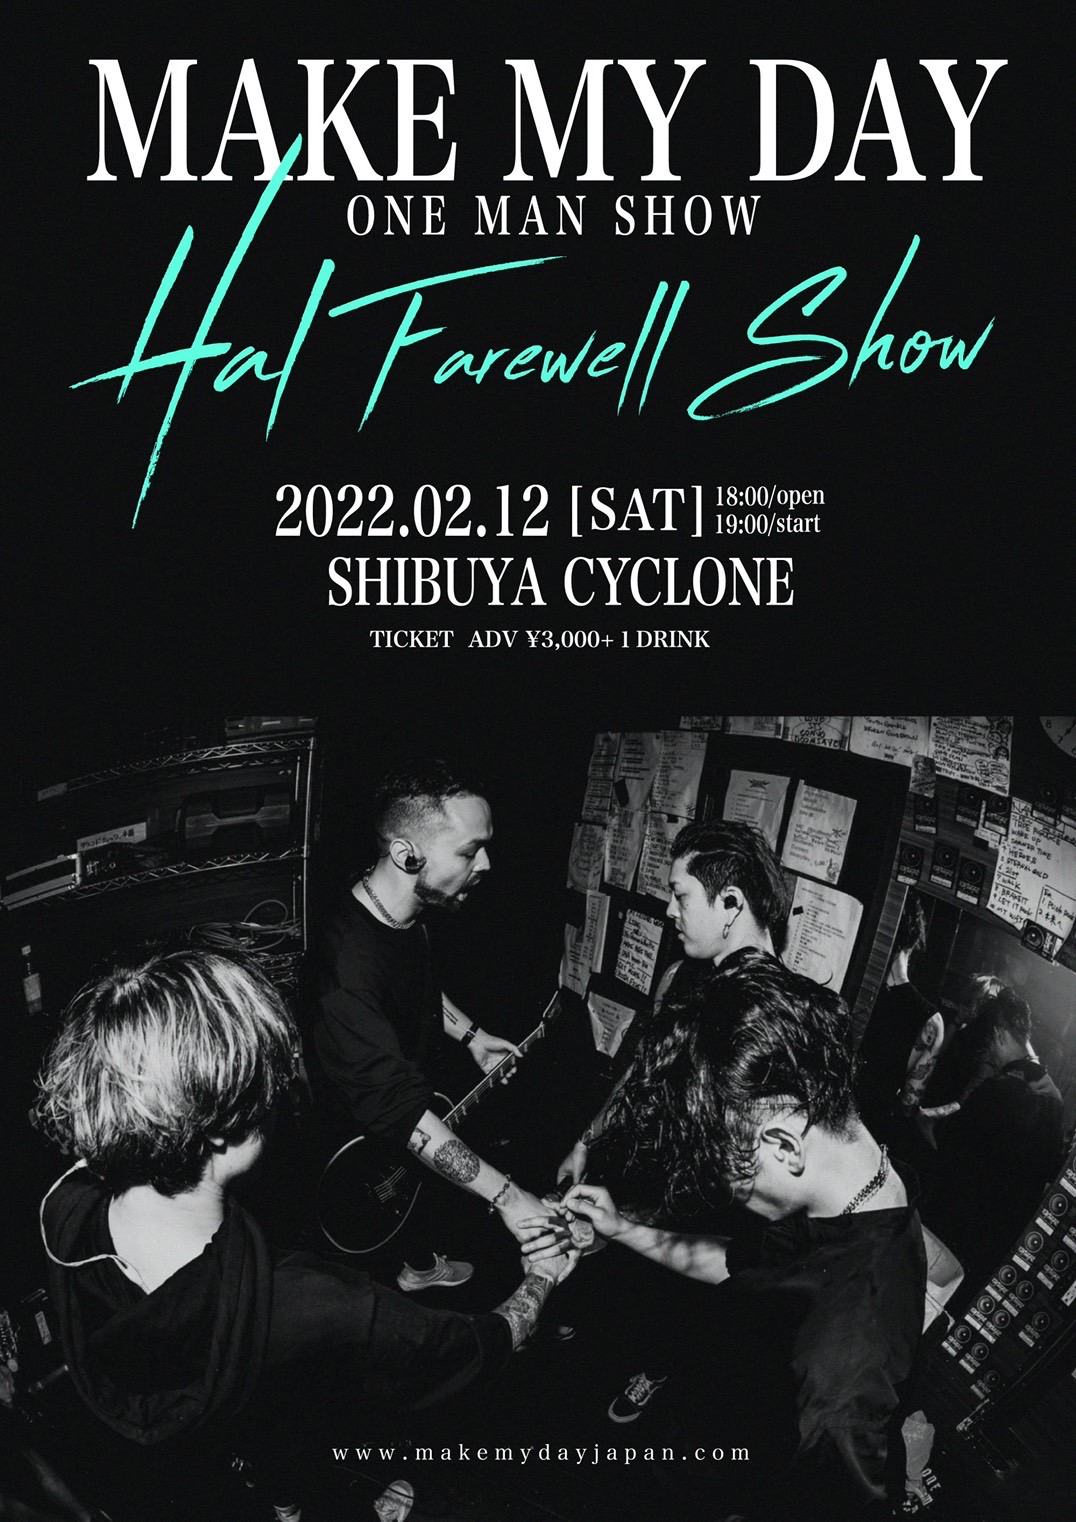 MAKE MY DAY ONE MAN SHOW "Hal Farewell Show"